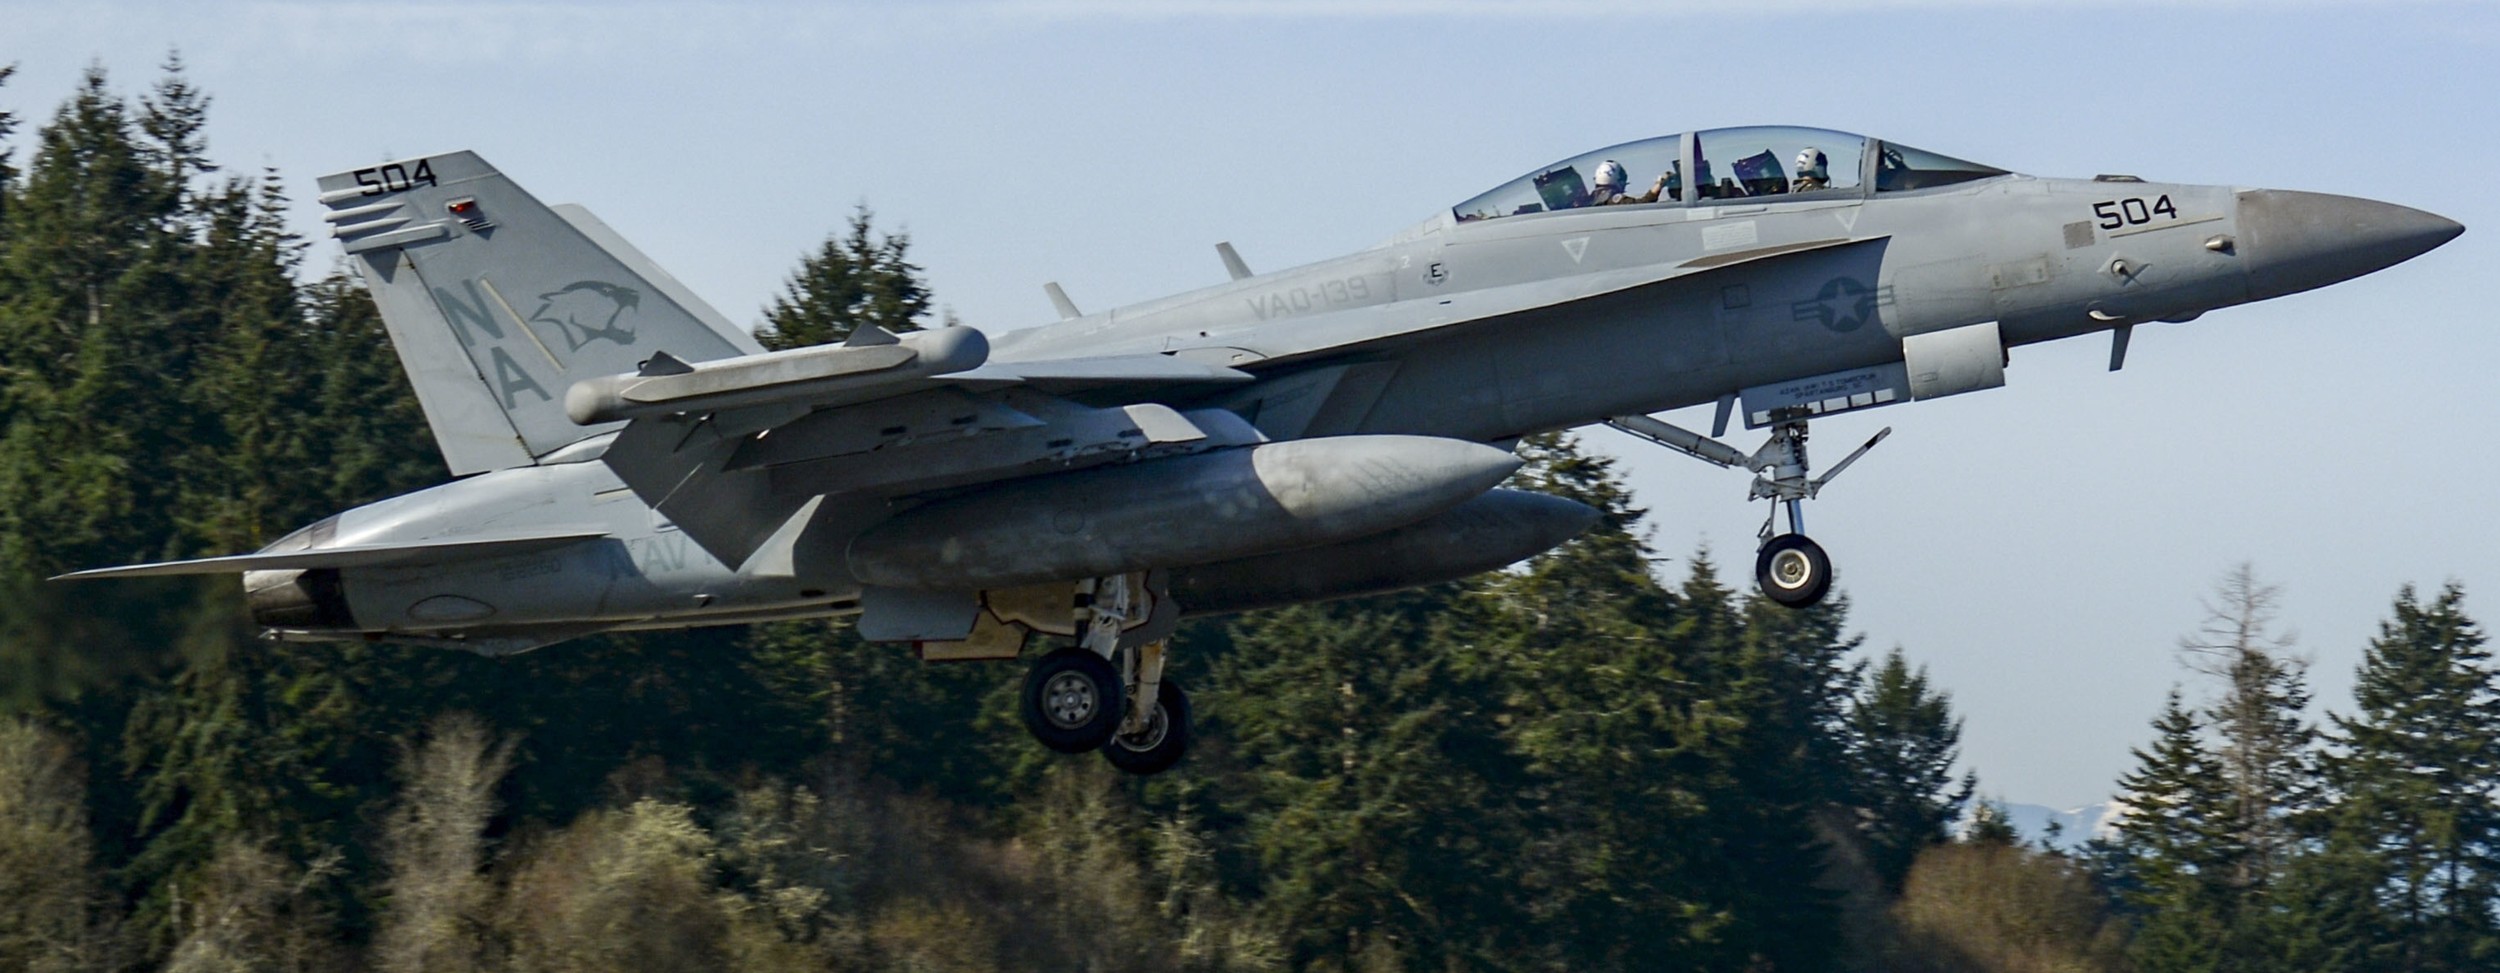 vaq-139 cougars electronic attack squadron us navy ea-18g growler cvw-17 nas whidbey island 114